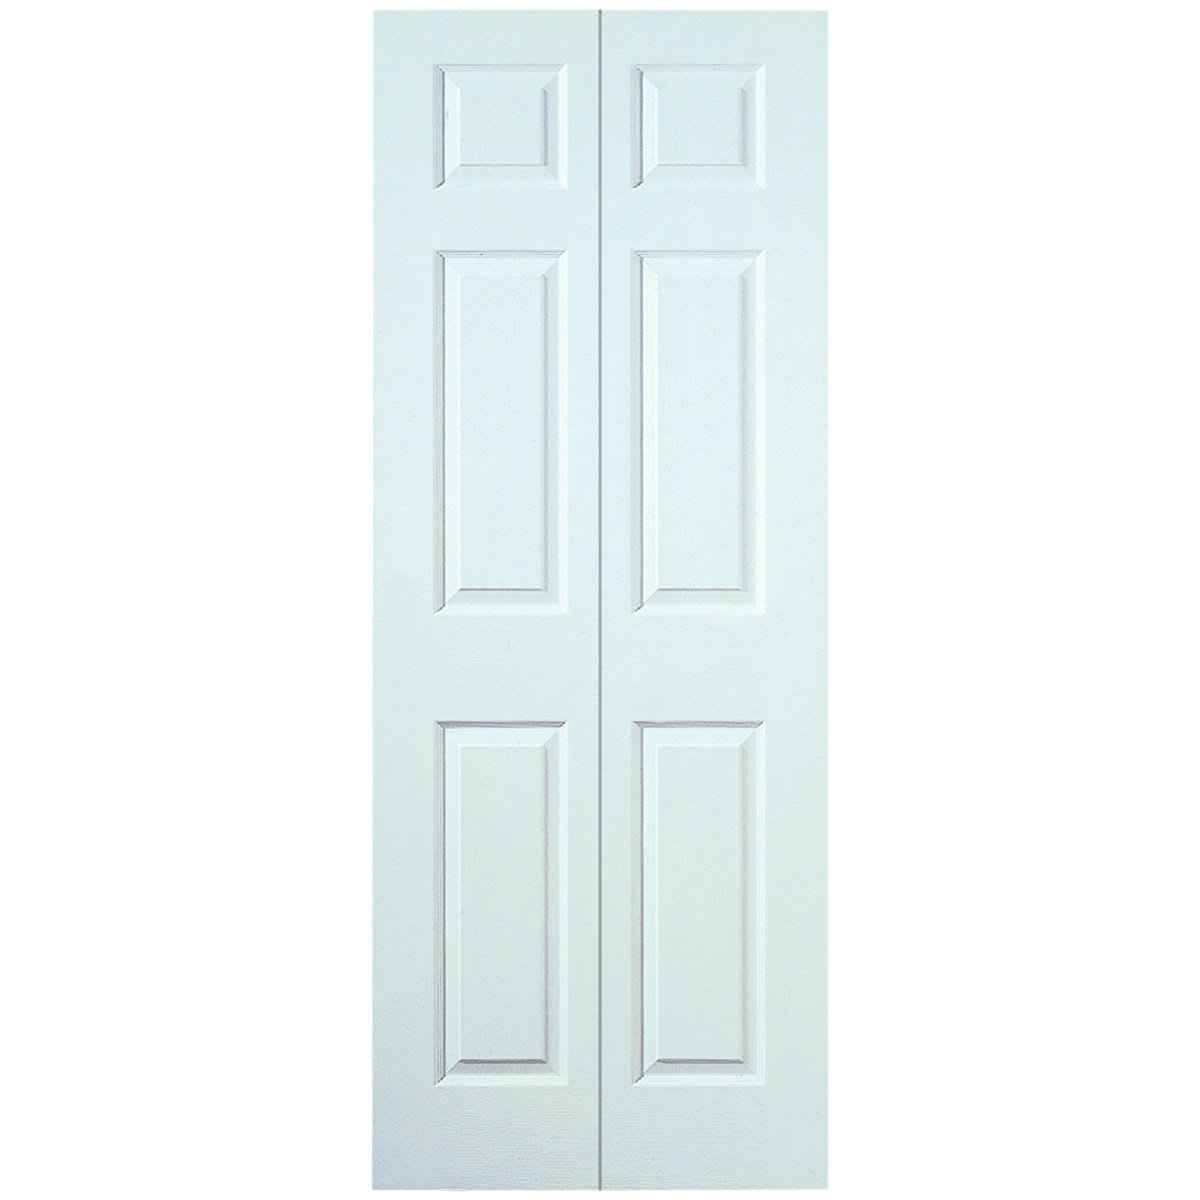 Wickes Lincoln White Smooth Moulded 6 Panel Internal Bi-Fold Door ...